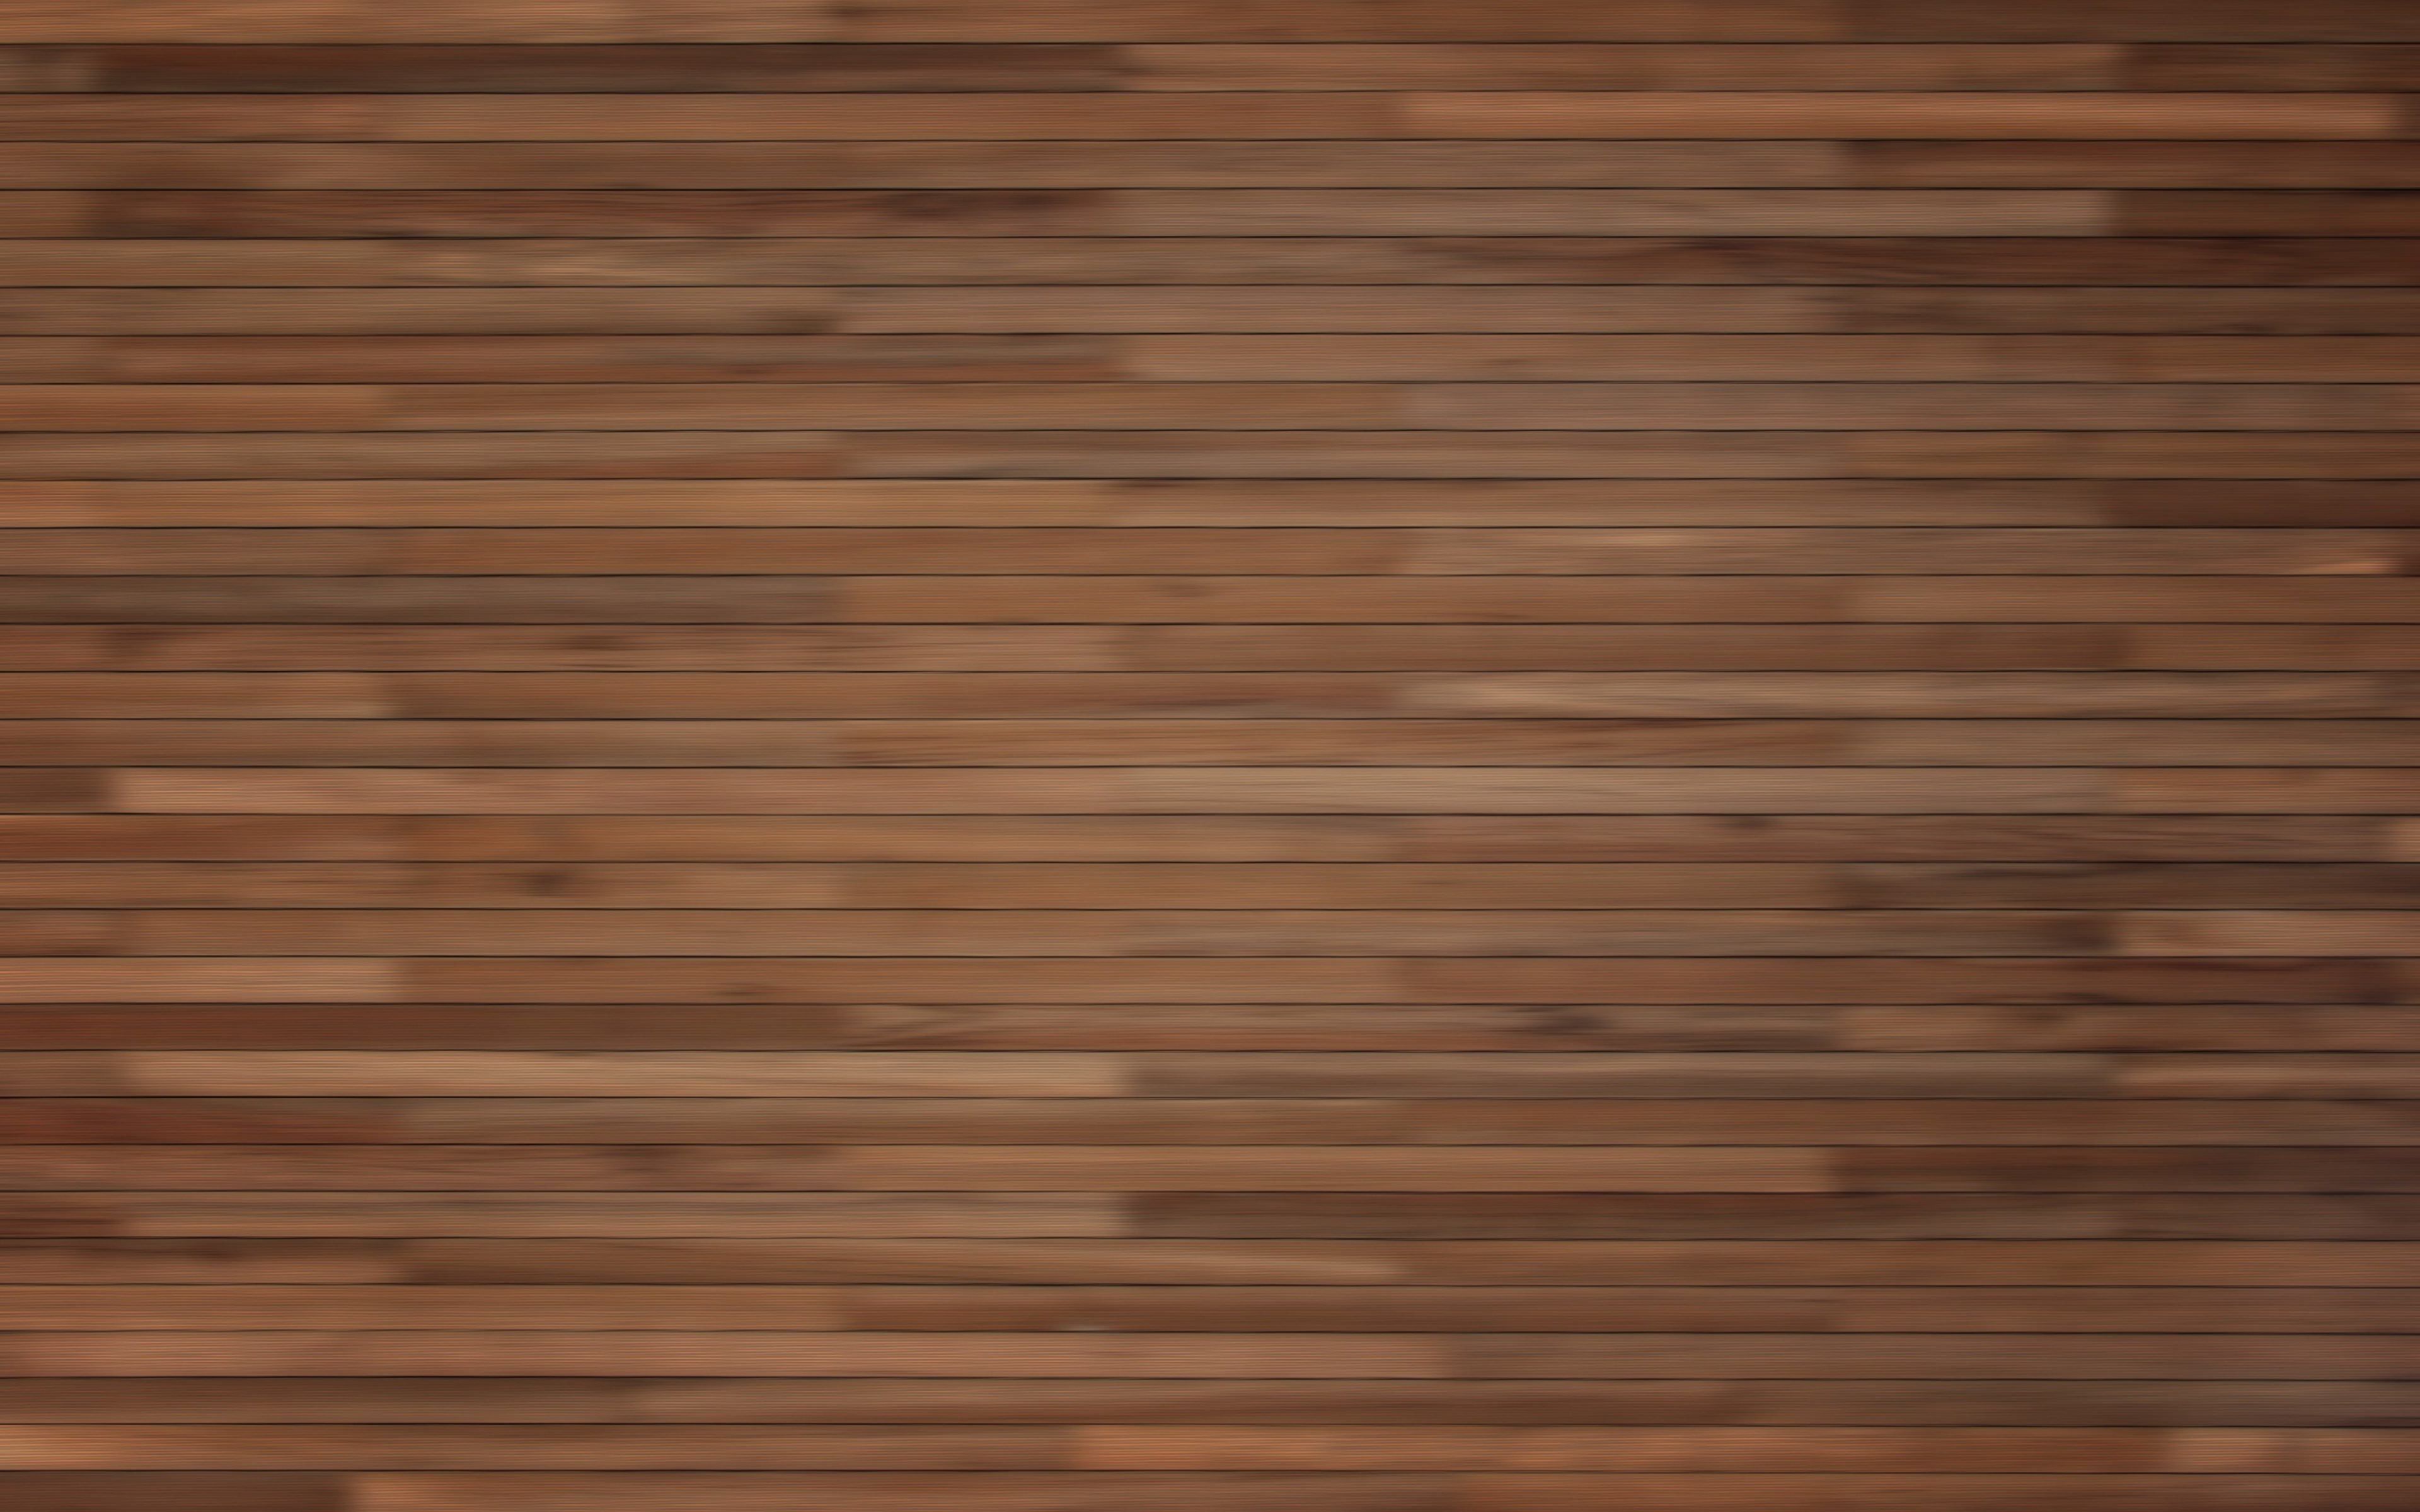 FREE Wood Plank Background in PSD